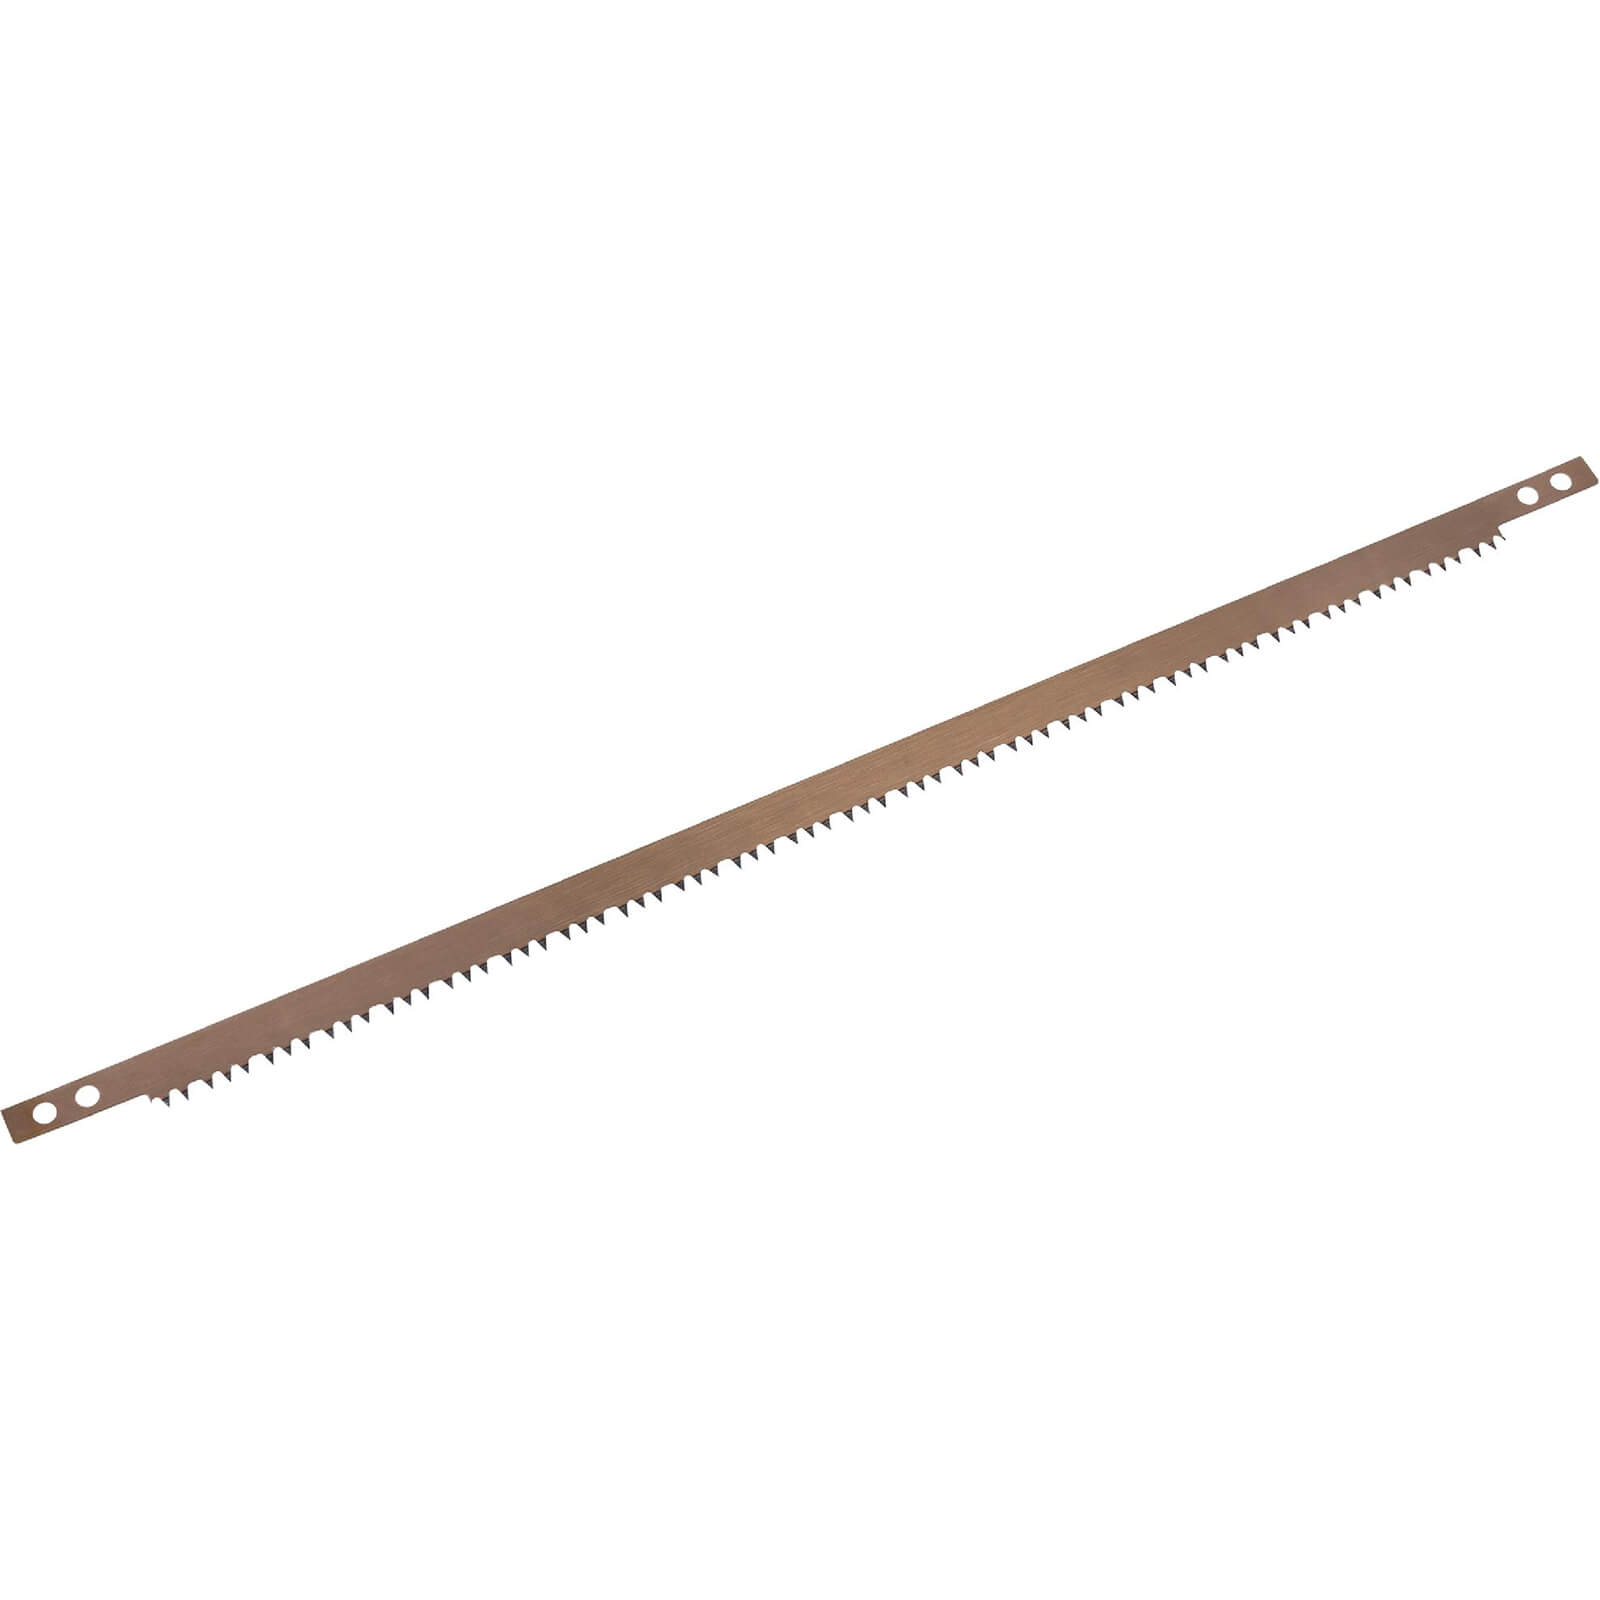 Image of Roughneck Bow Saw Blade with Small Teeth 30" / 700mm